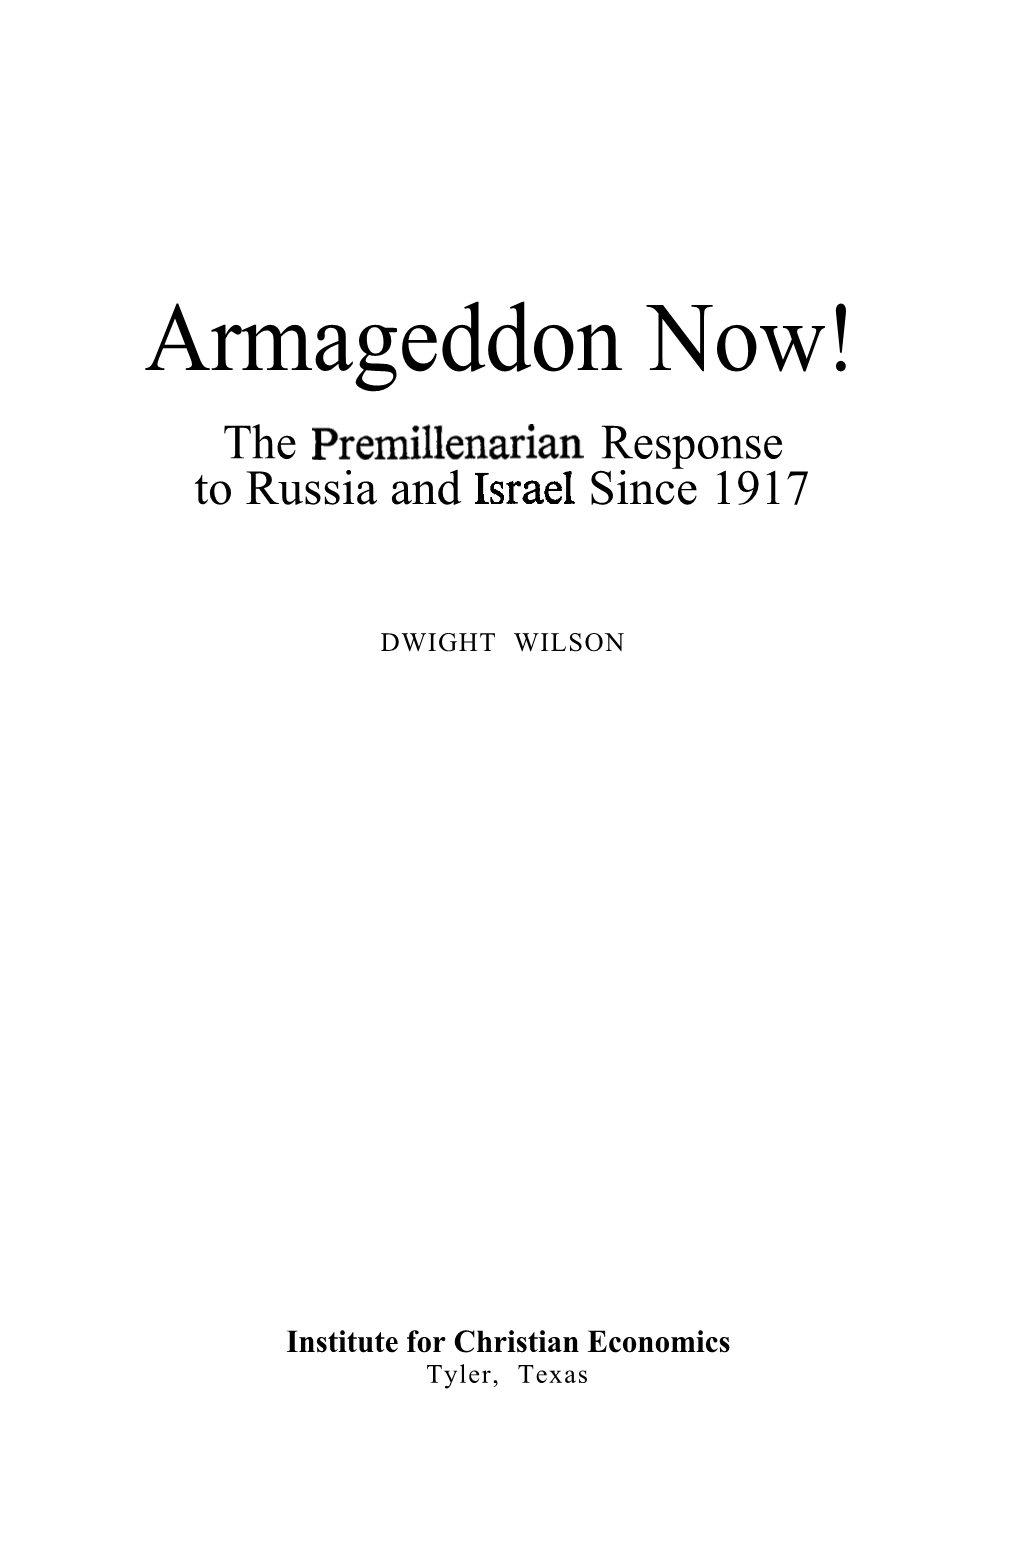 Armageddon Now! the Premillenarian Response to Russia and Israel Since 1917